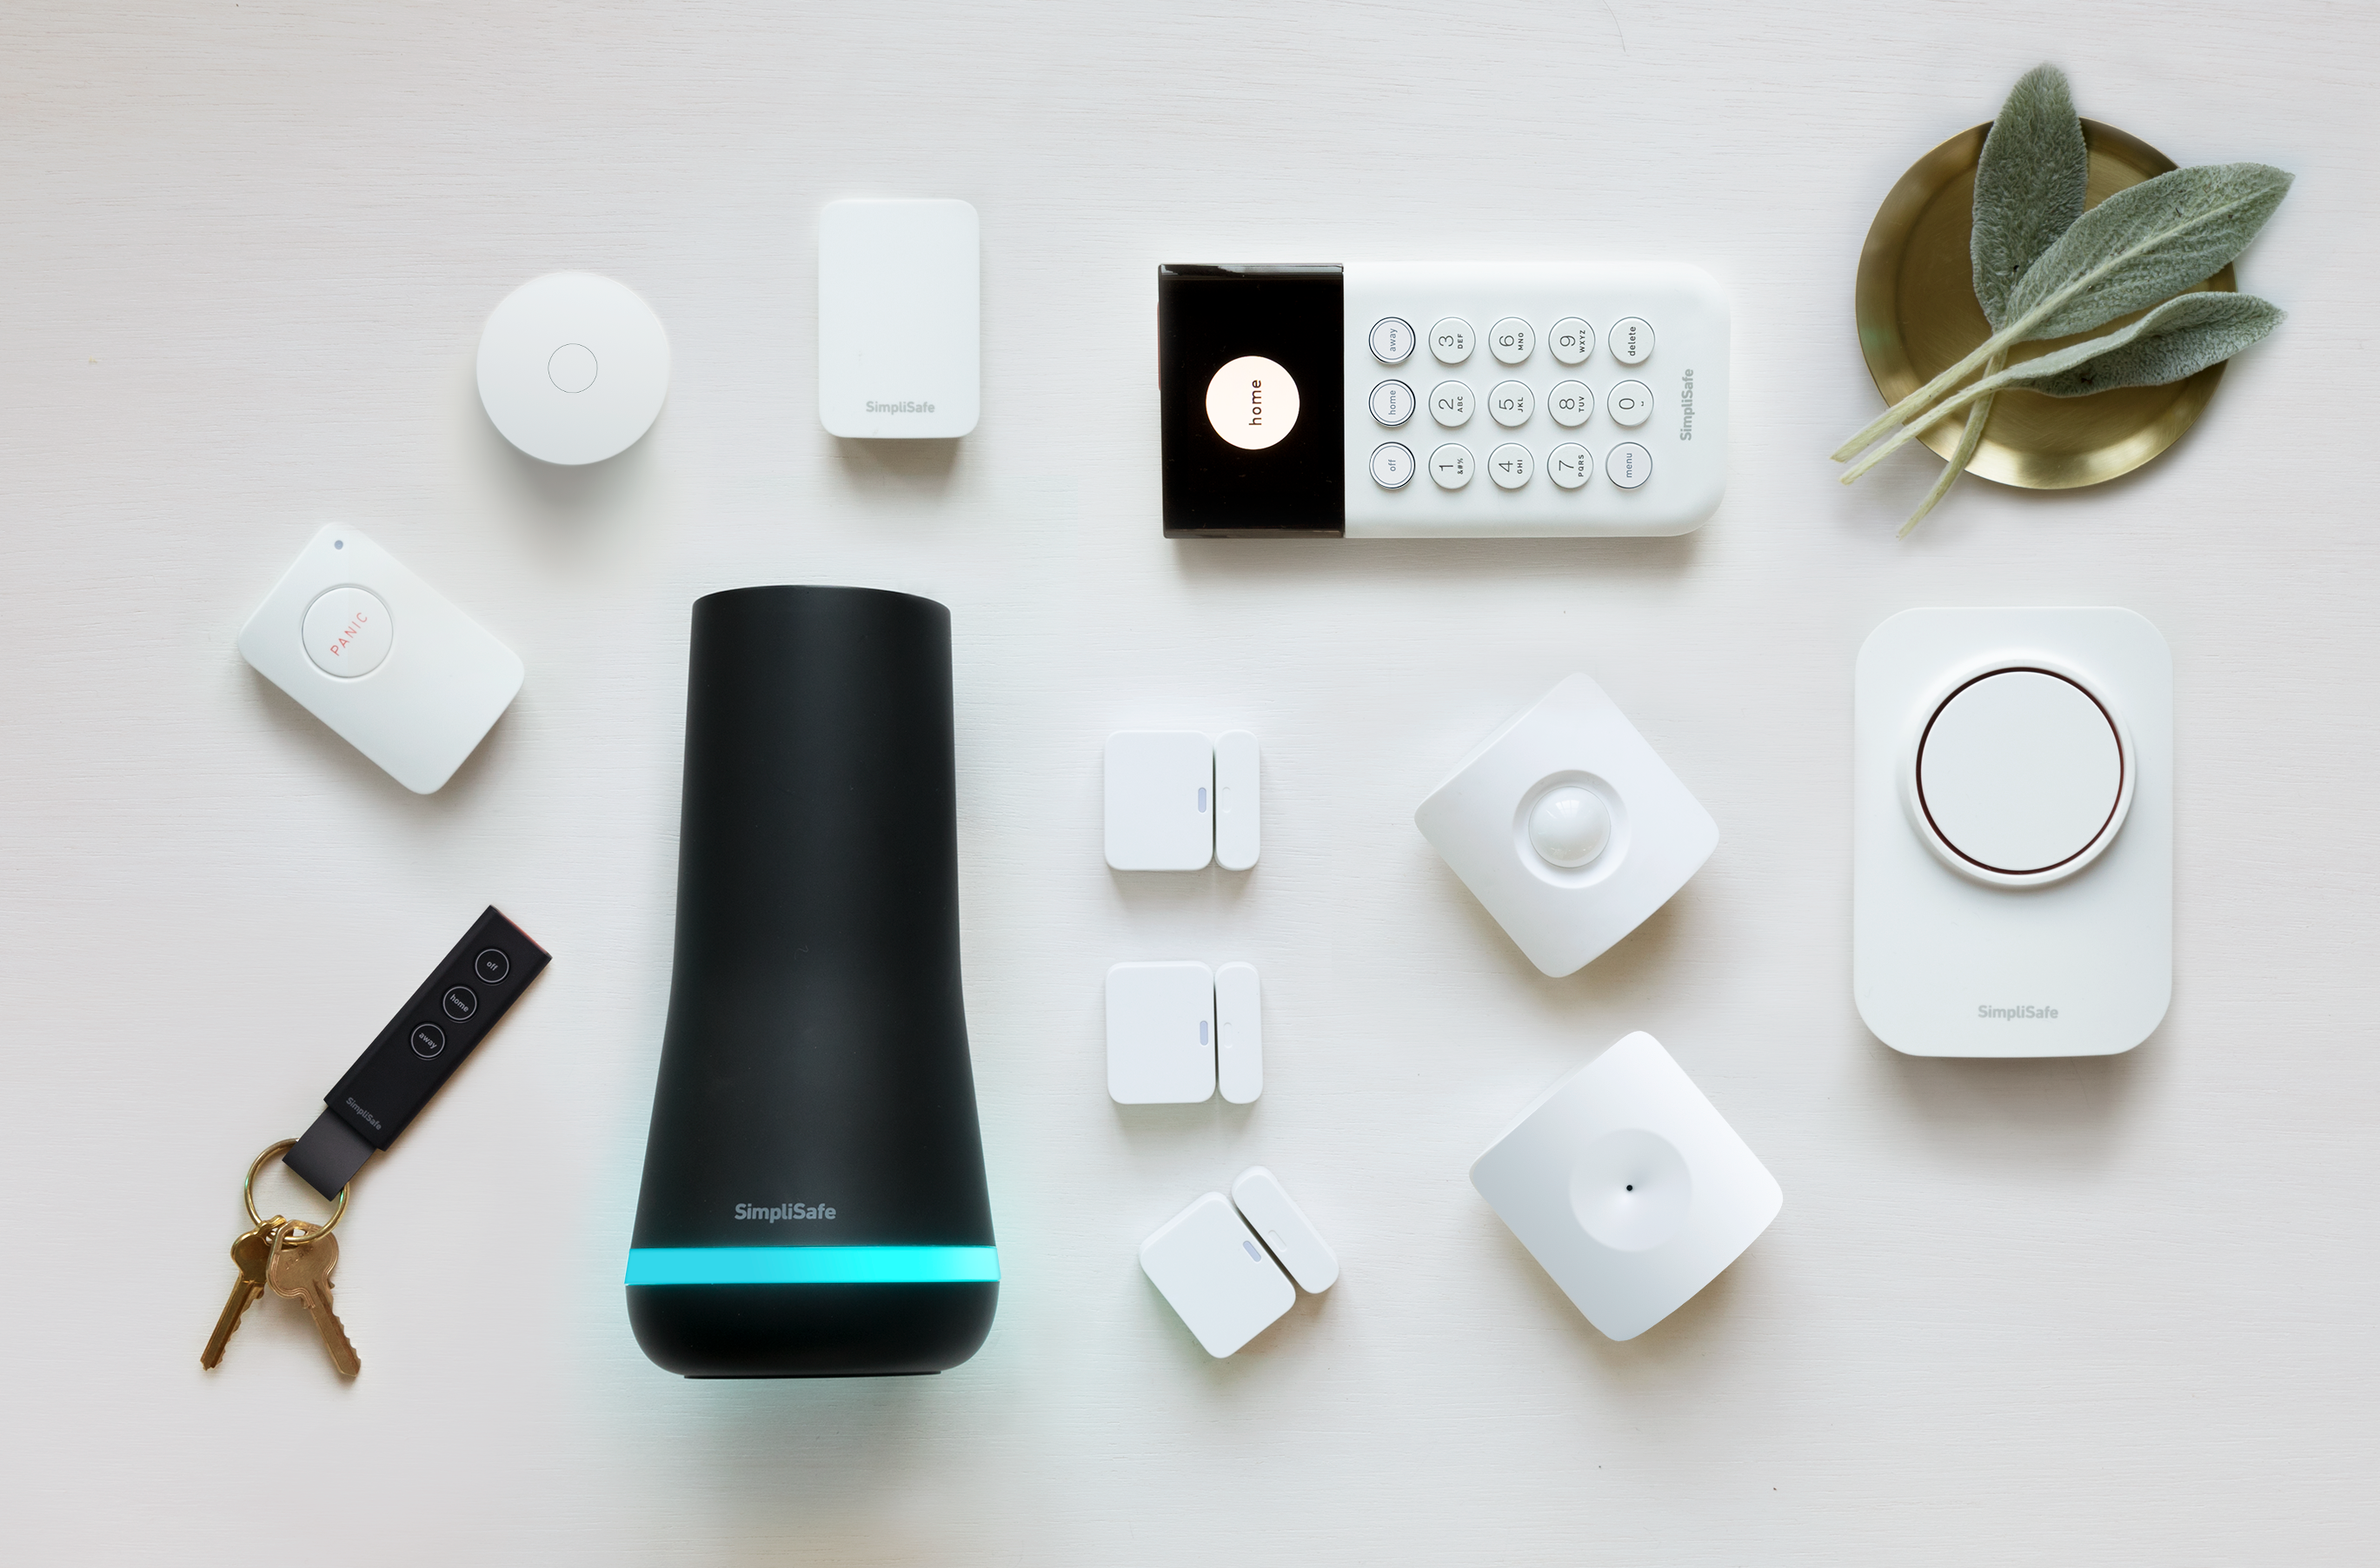 How Does SimpliSafe Work? Learn About Monitoring Equipment and Price